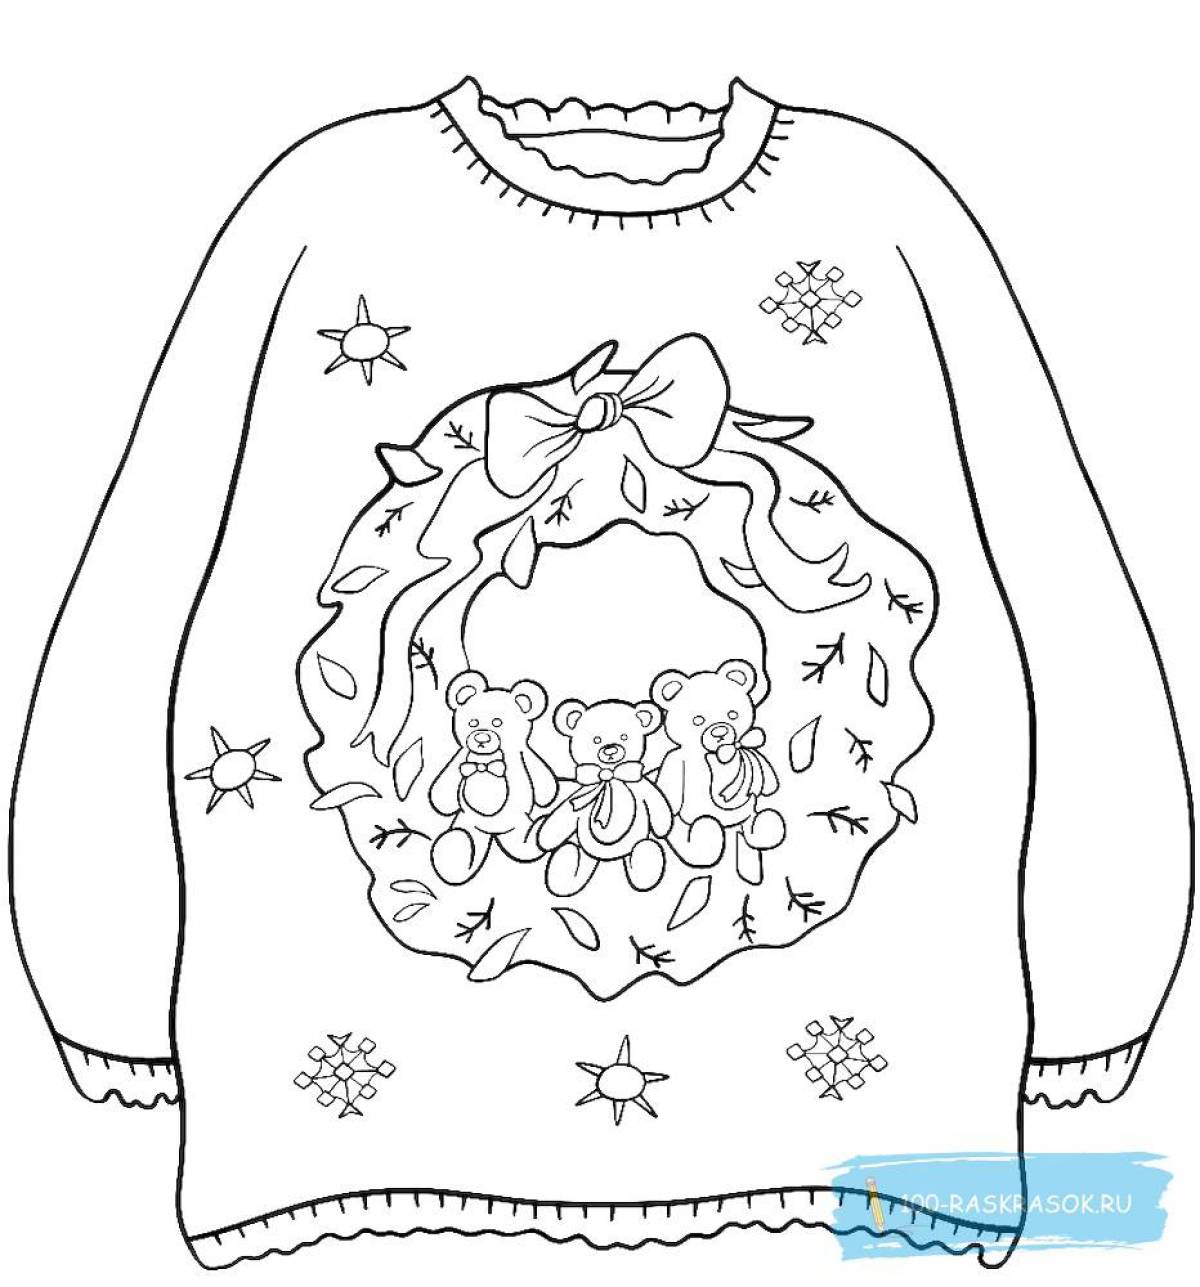 Rampant sweater coloring page